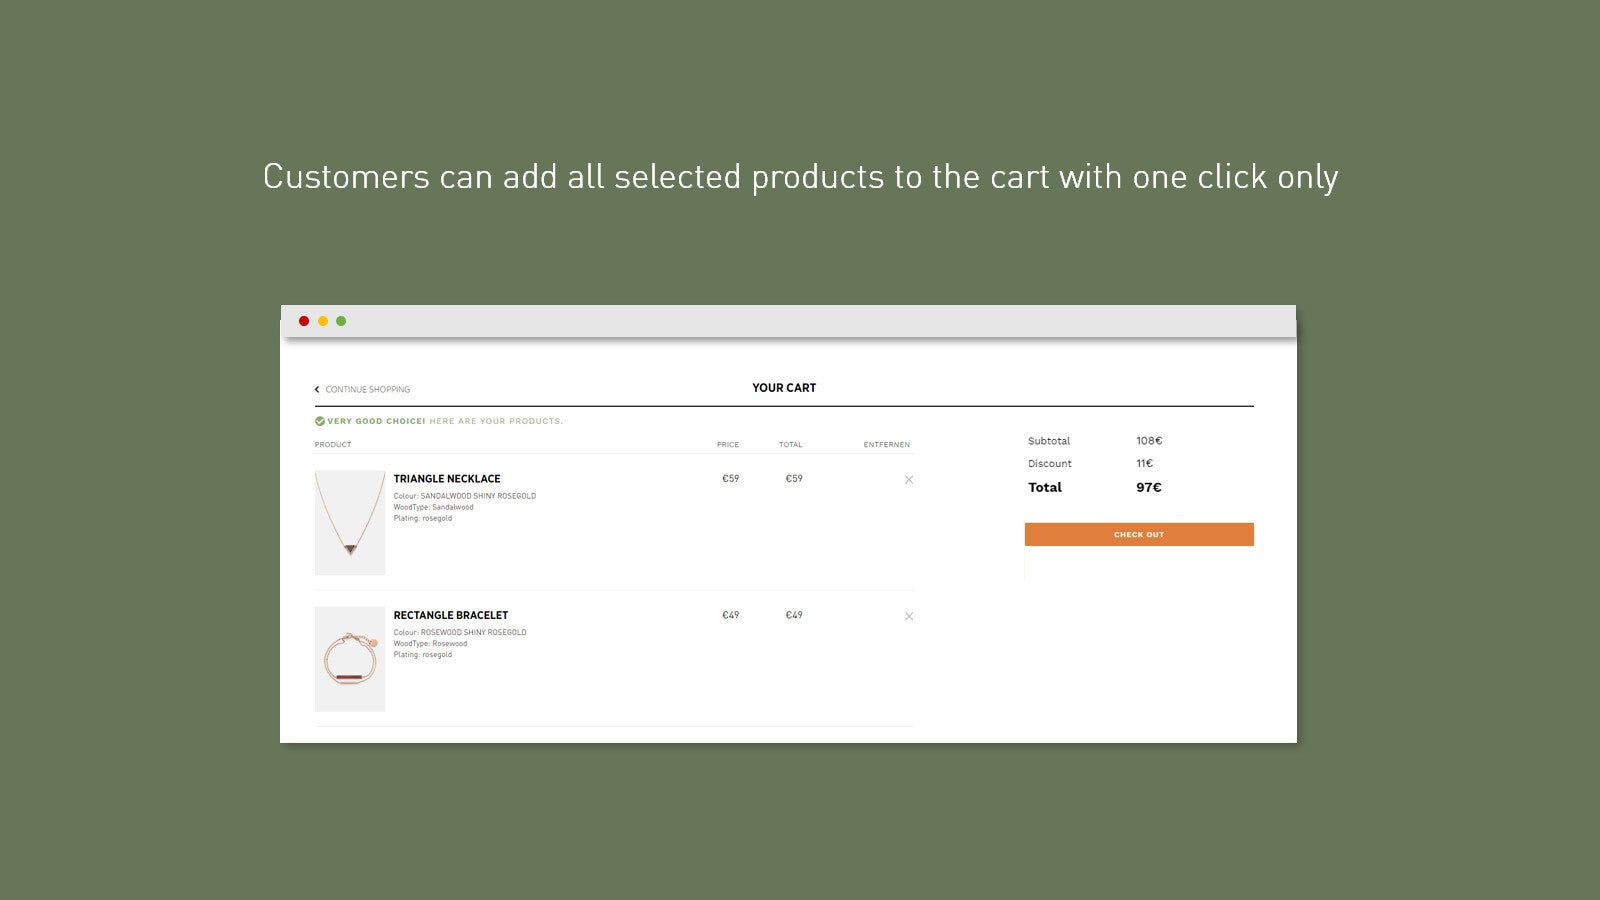 Customer can add all selected product in the cart.